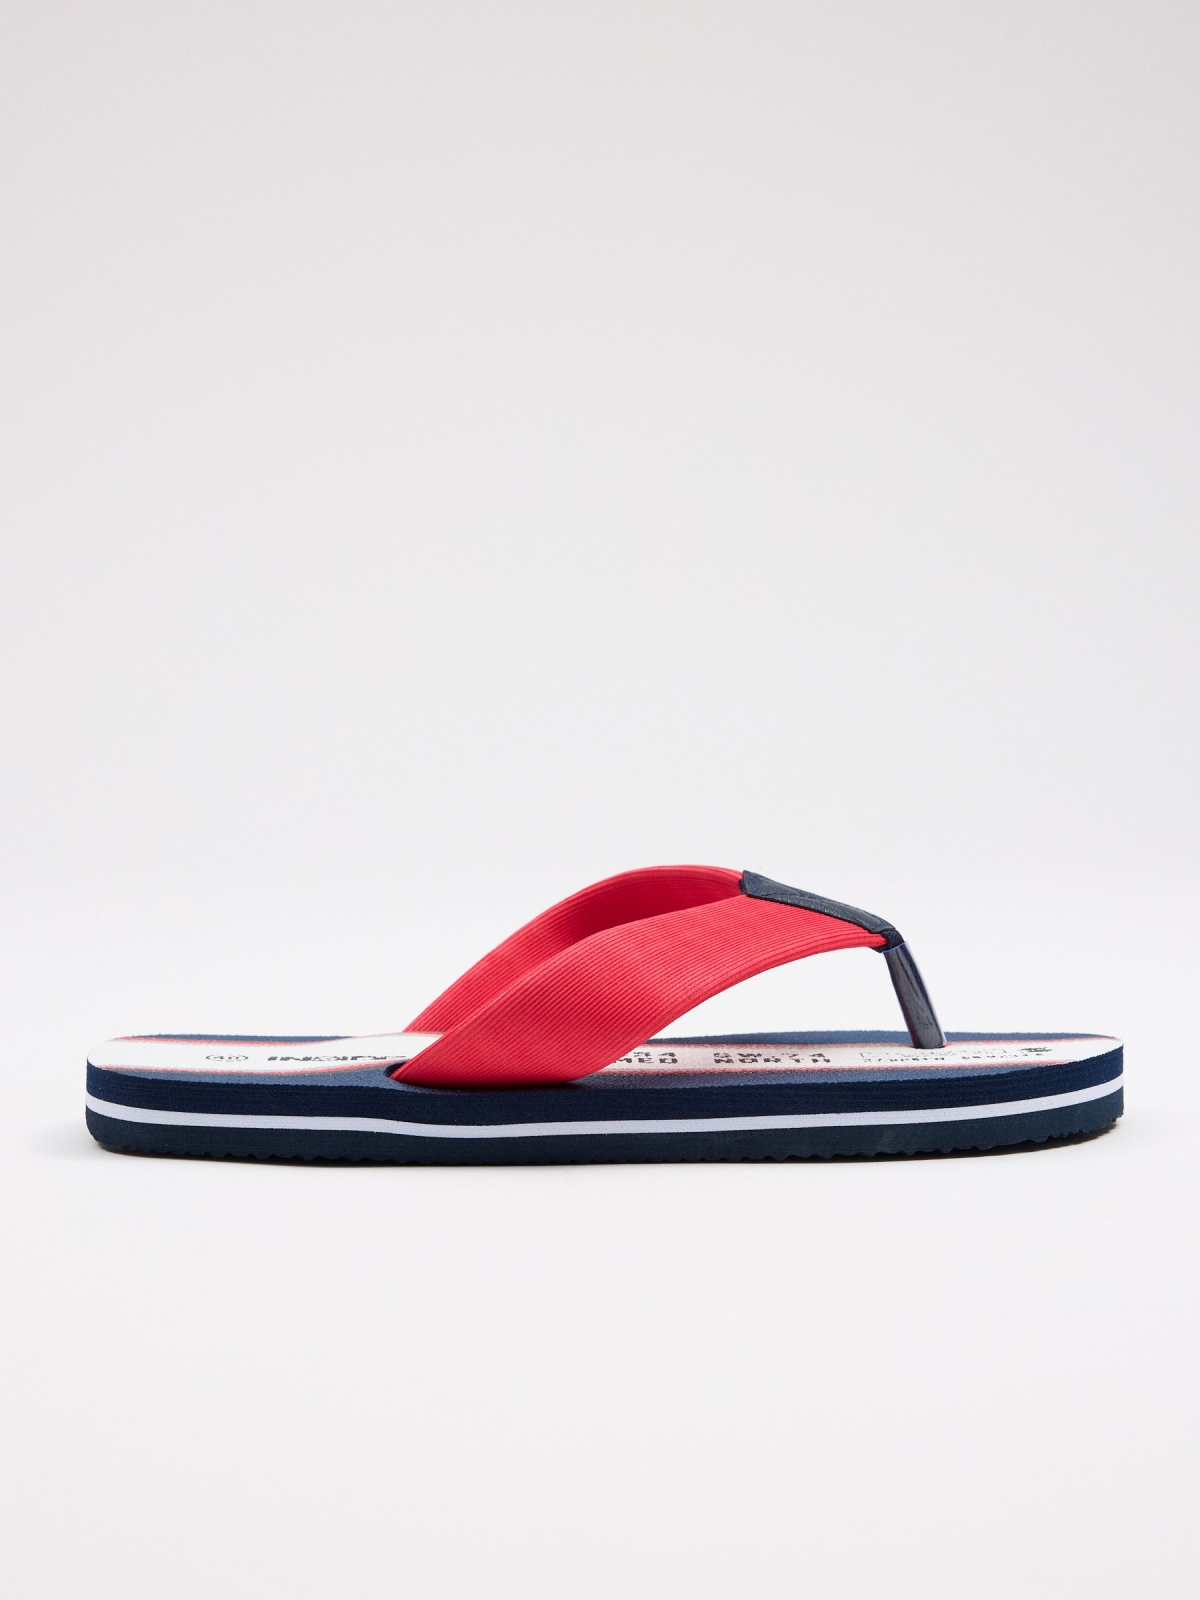 Leatherette thong flip flops navy lateral view